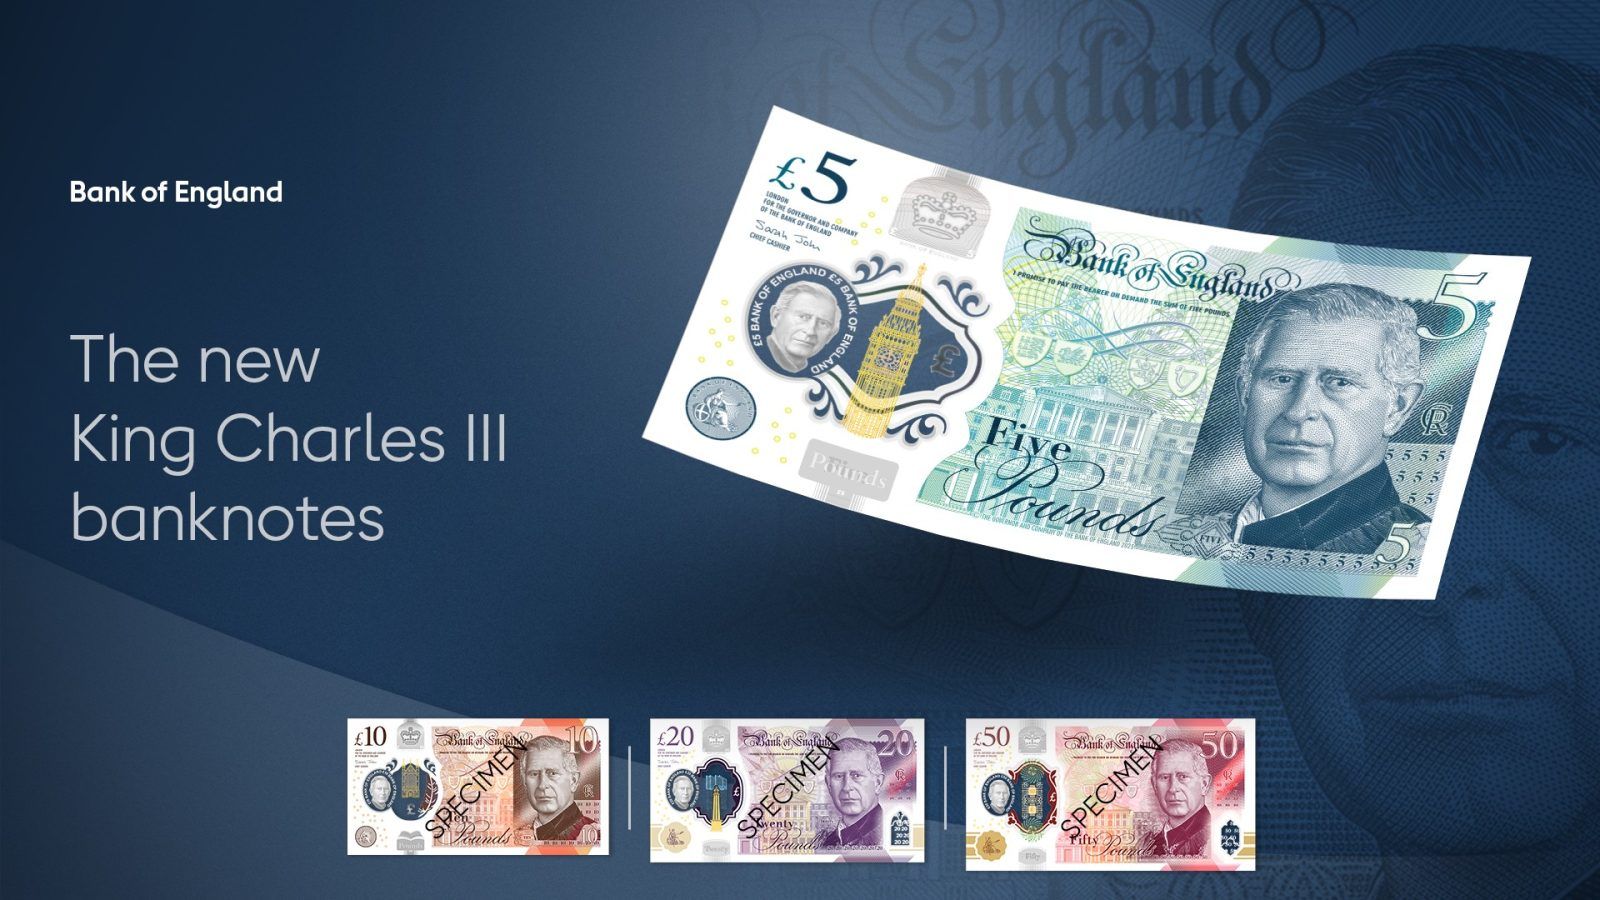 BoE unveils new UK currency notes specimen featuring King Charles